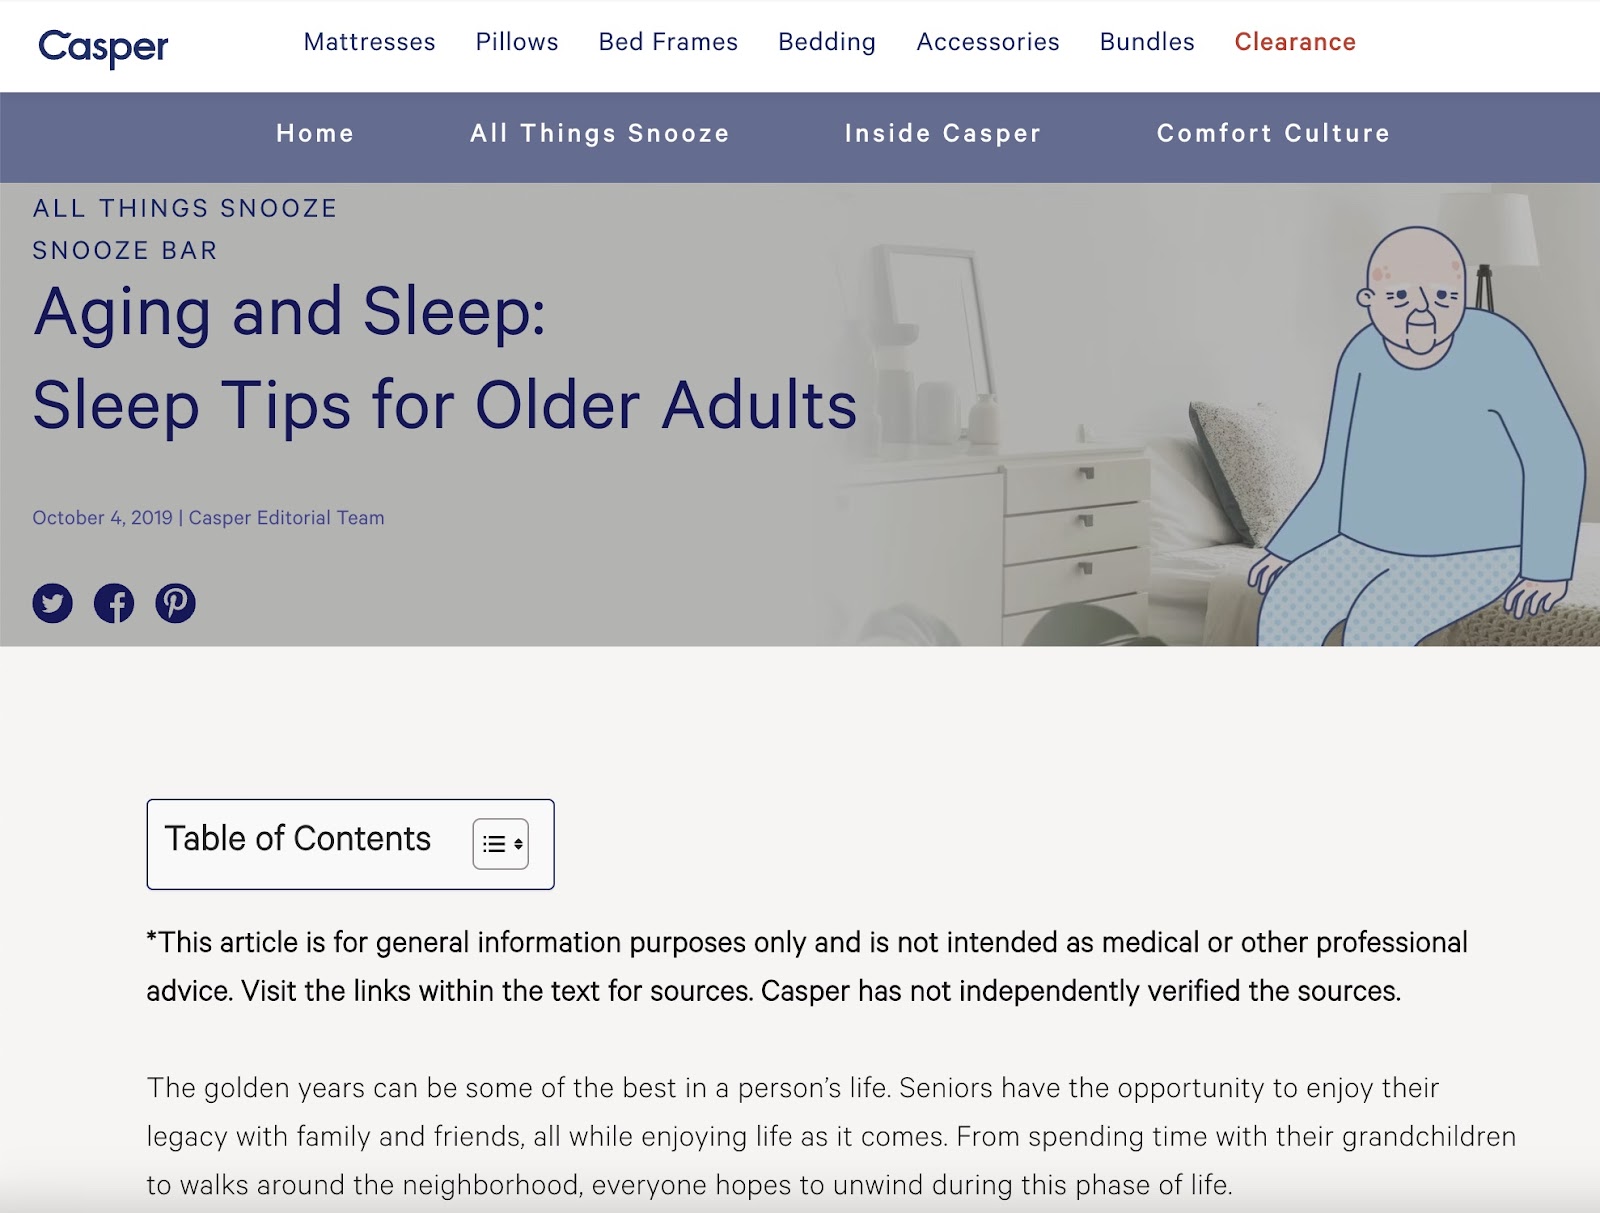 Casper's blog on aging and sleep page